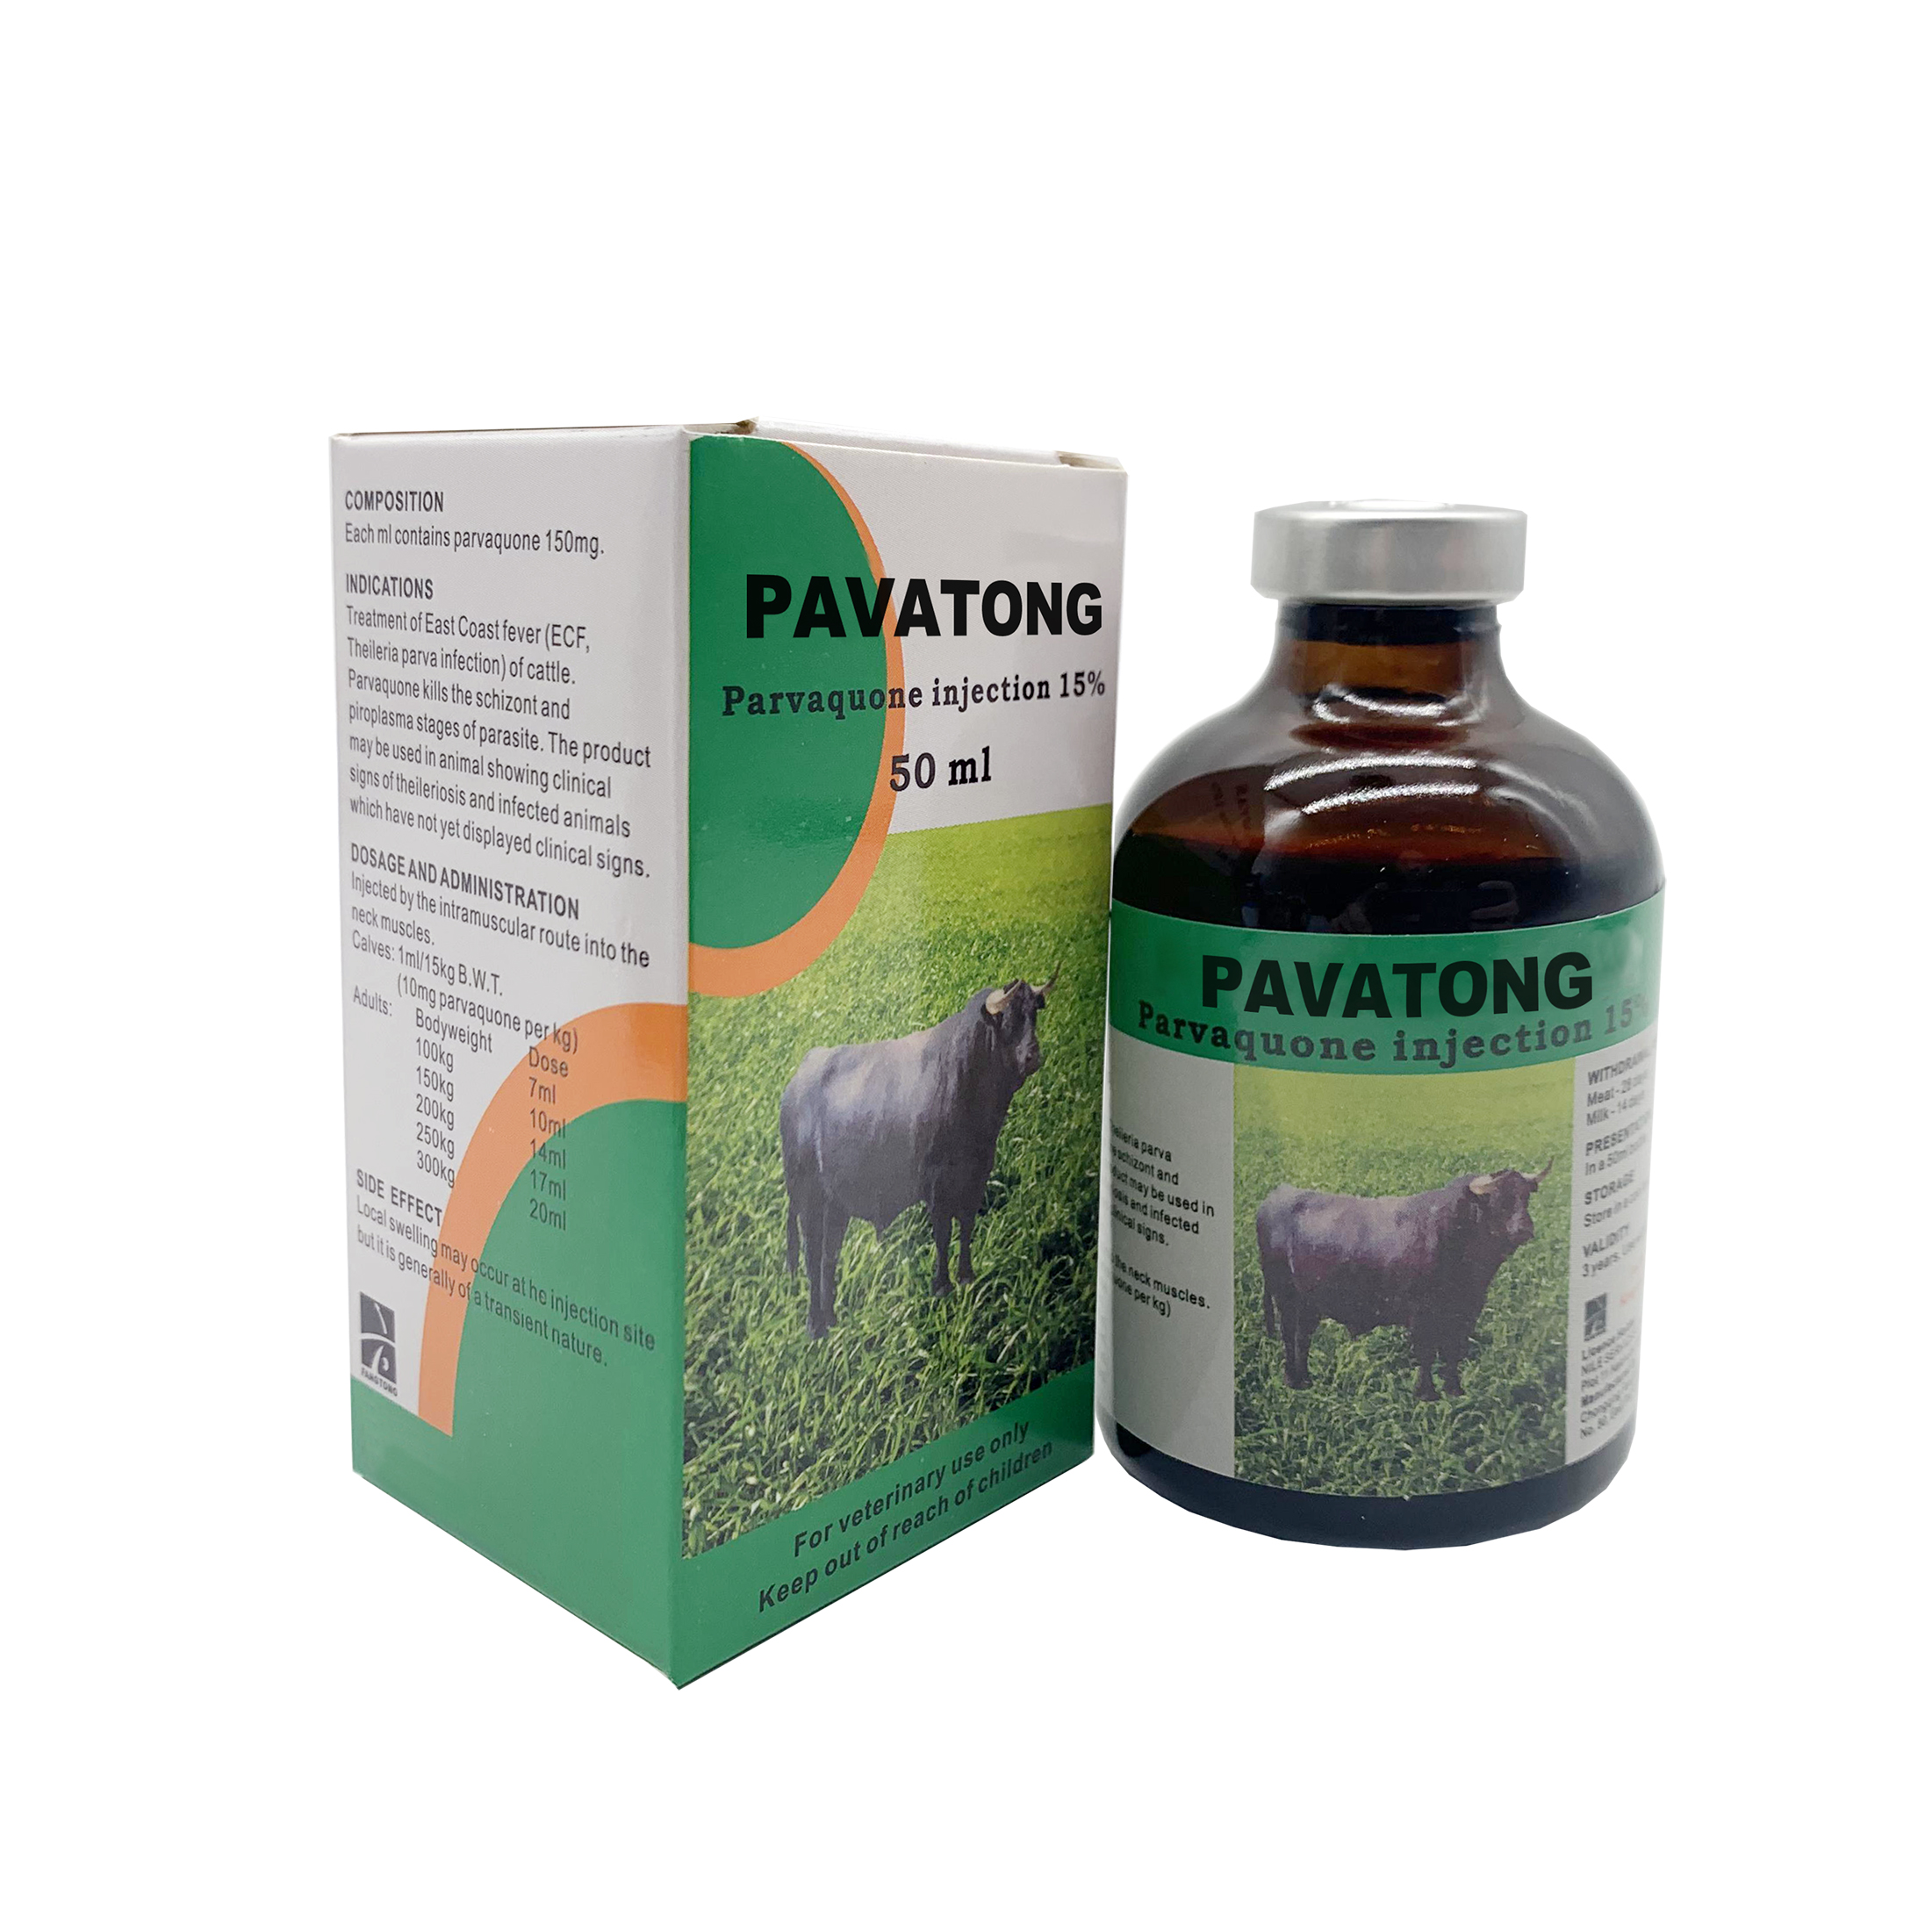 PAVATONG – Pavaquone injection 15% Featured Image